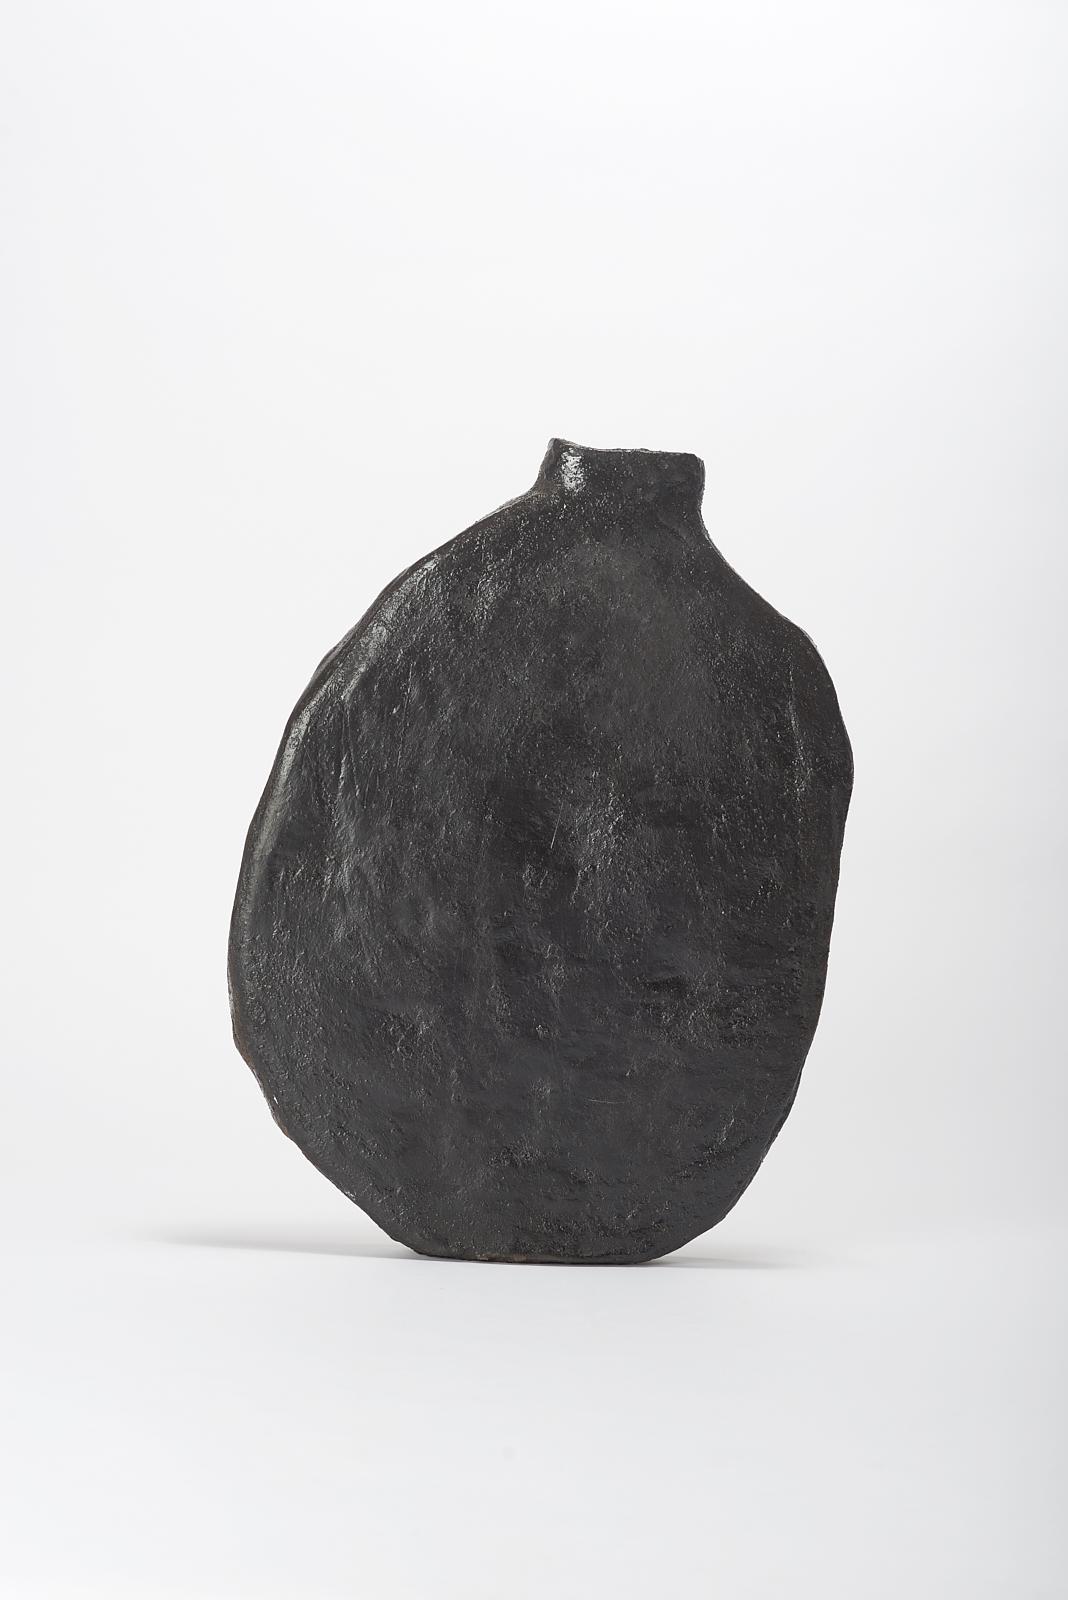 Magna Vase by Willem Van Hooff
Core Vessel Series
Dimensions: W 37 x D 10 x H 52 cm (Dimensions may vary as pieces are hand-made and might present slight variations in sizes)
Materials: Earthenware, ceramic, pigments, glaze.

Core is a series of